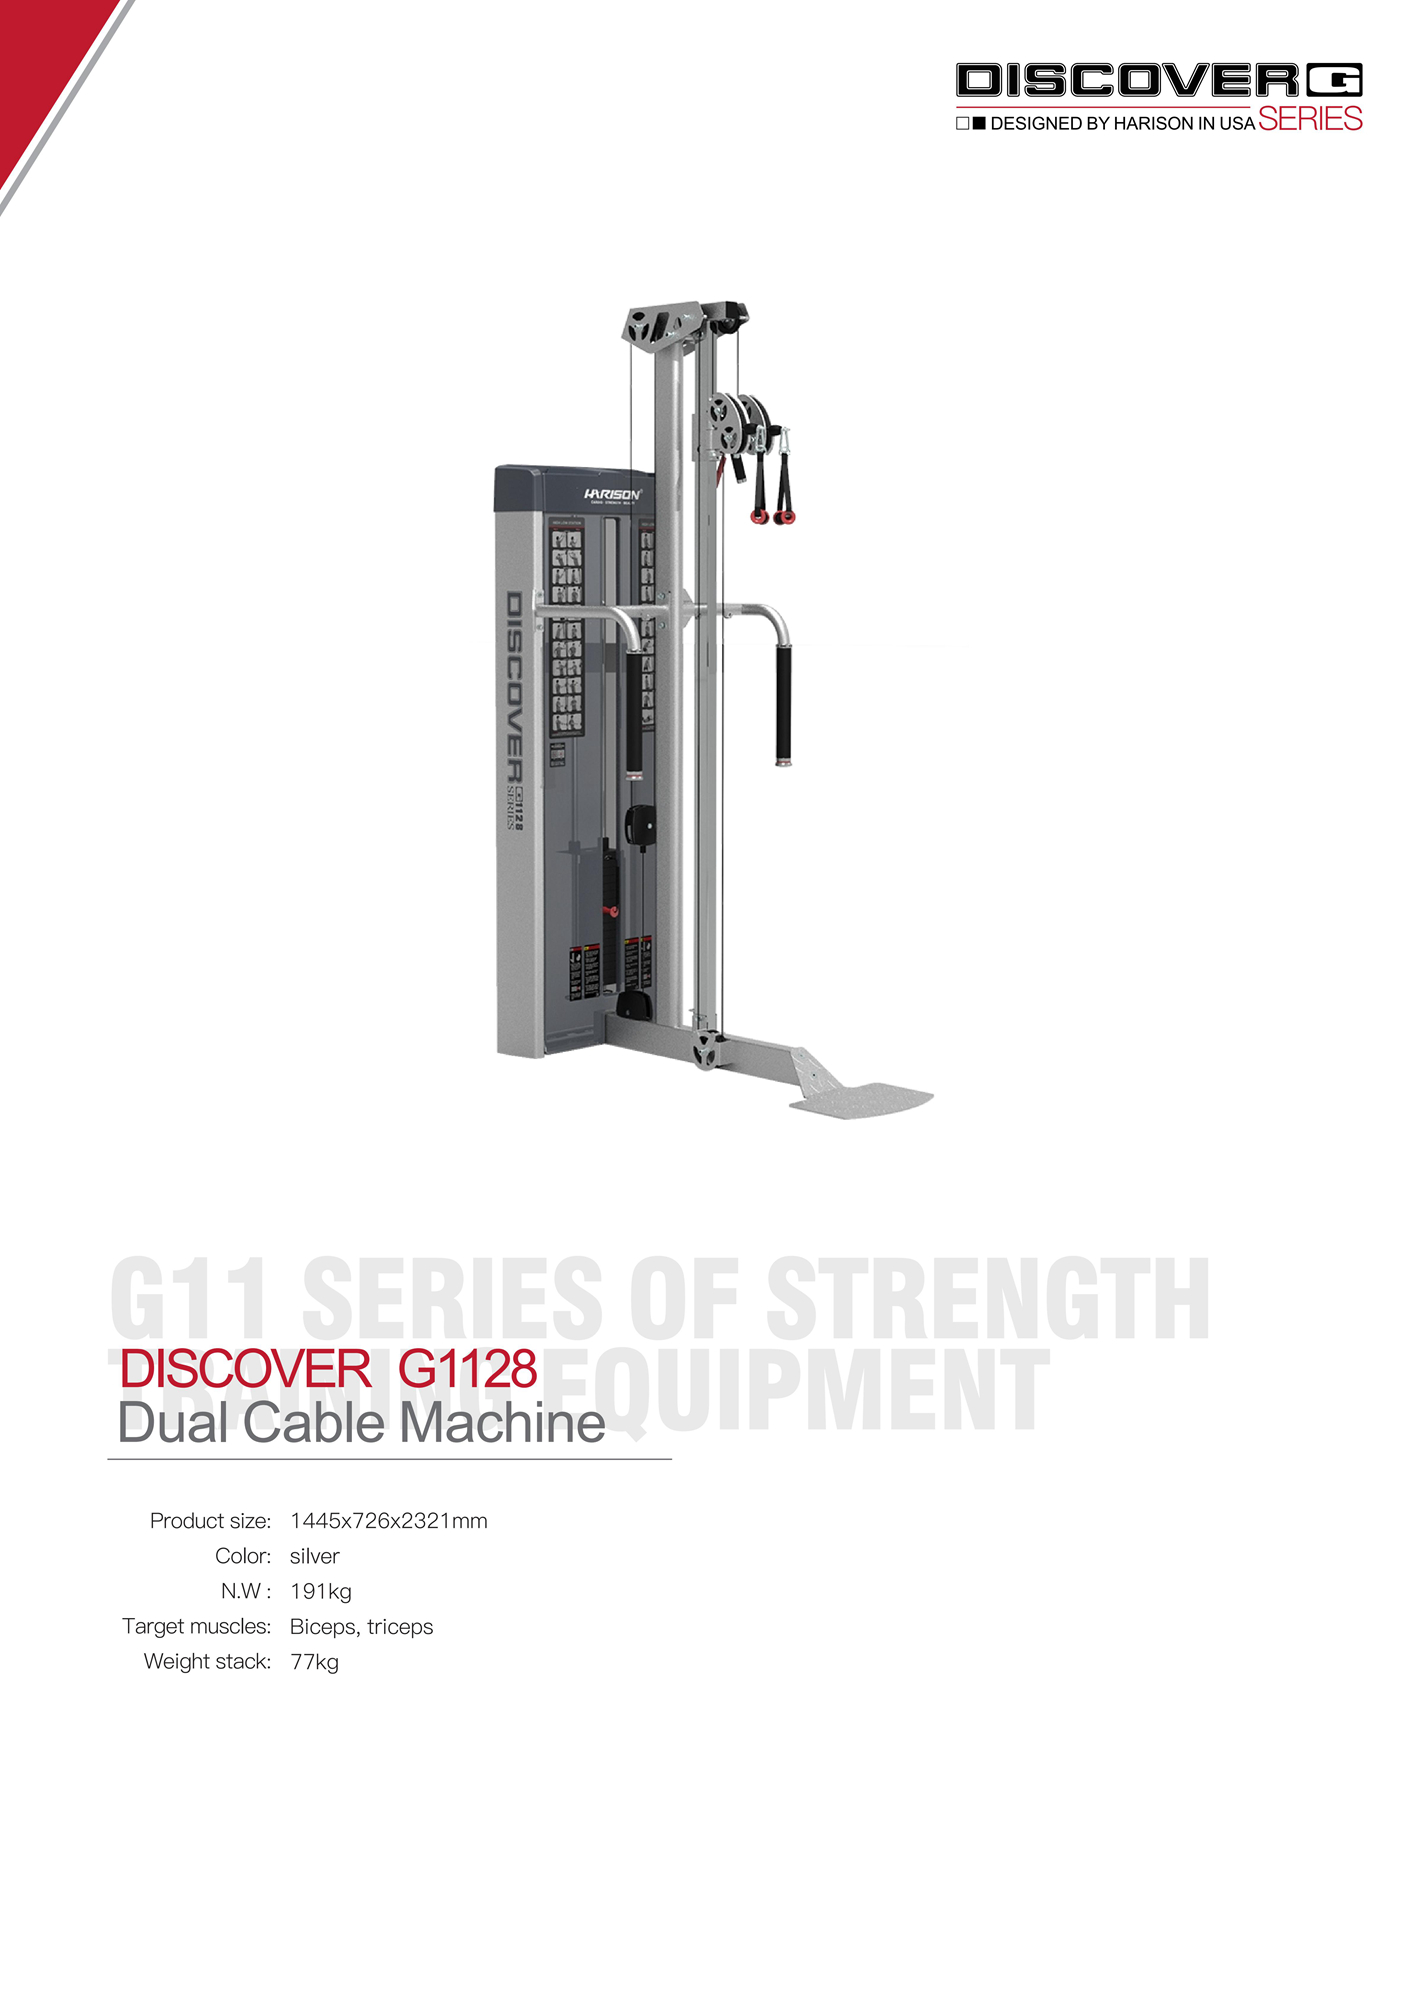 DISCOVER G1128 Dual Cable Machine